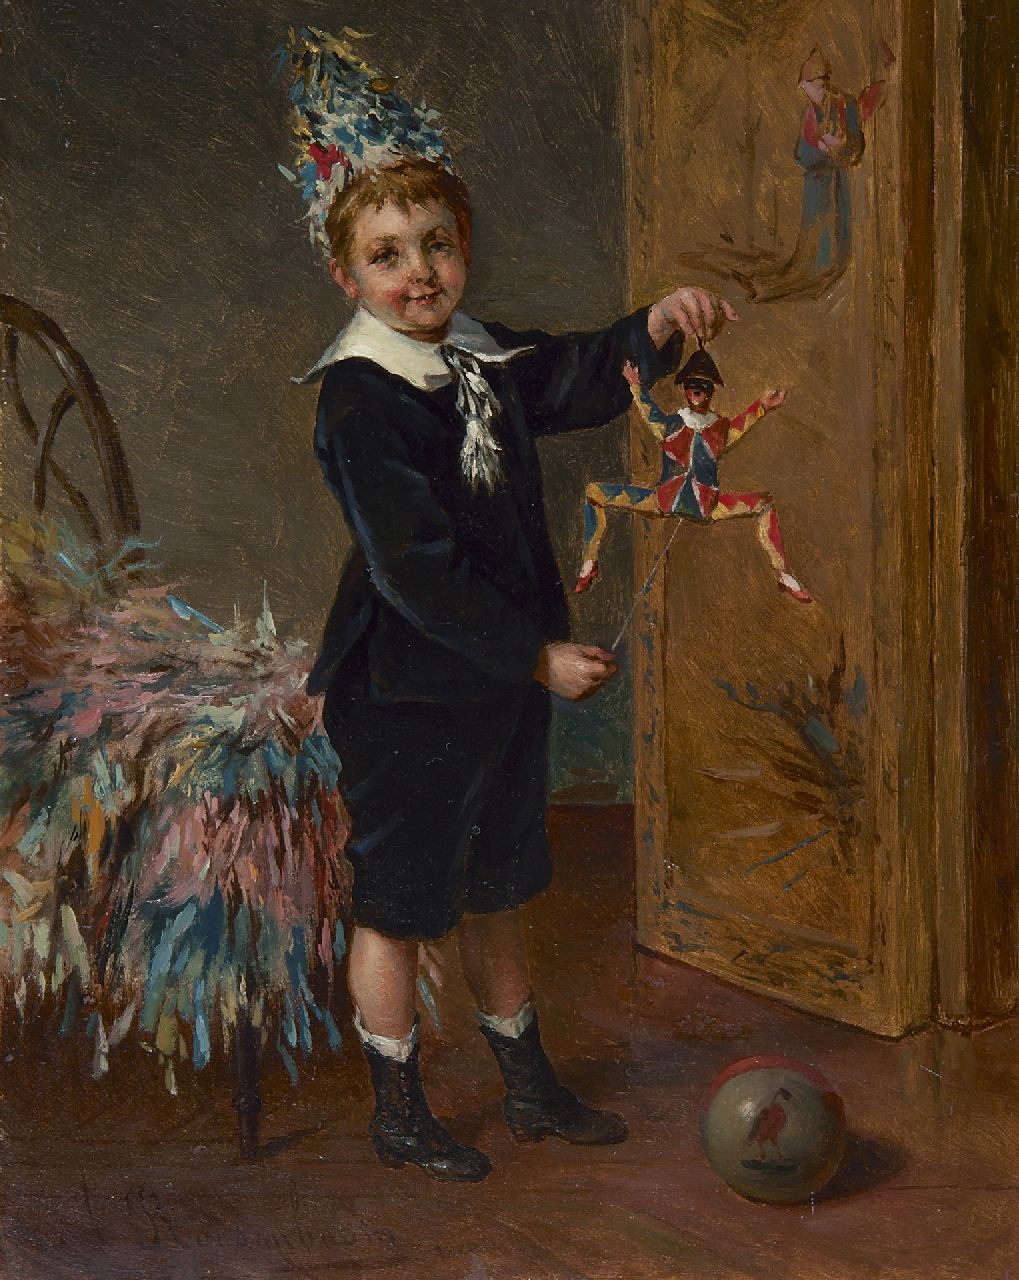 Roosenboom A.  | Albert Roosenboom | Paintings offered for sale | The young entertainer, oil on panel 24.0 x 18.8 cm, signed l.l.